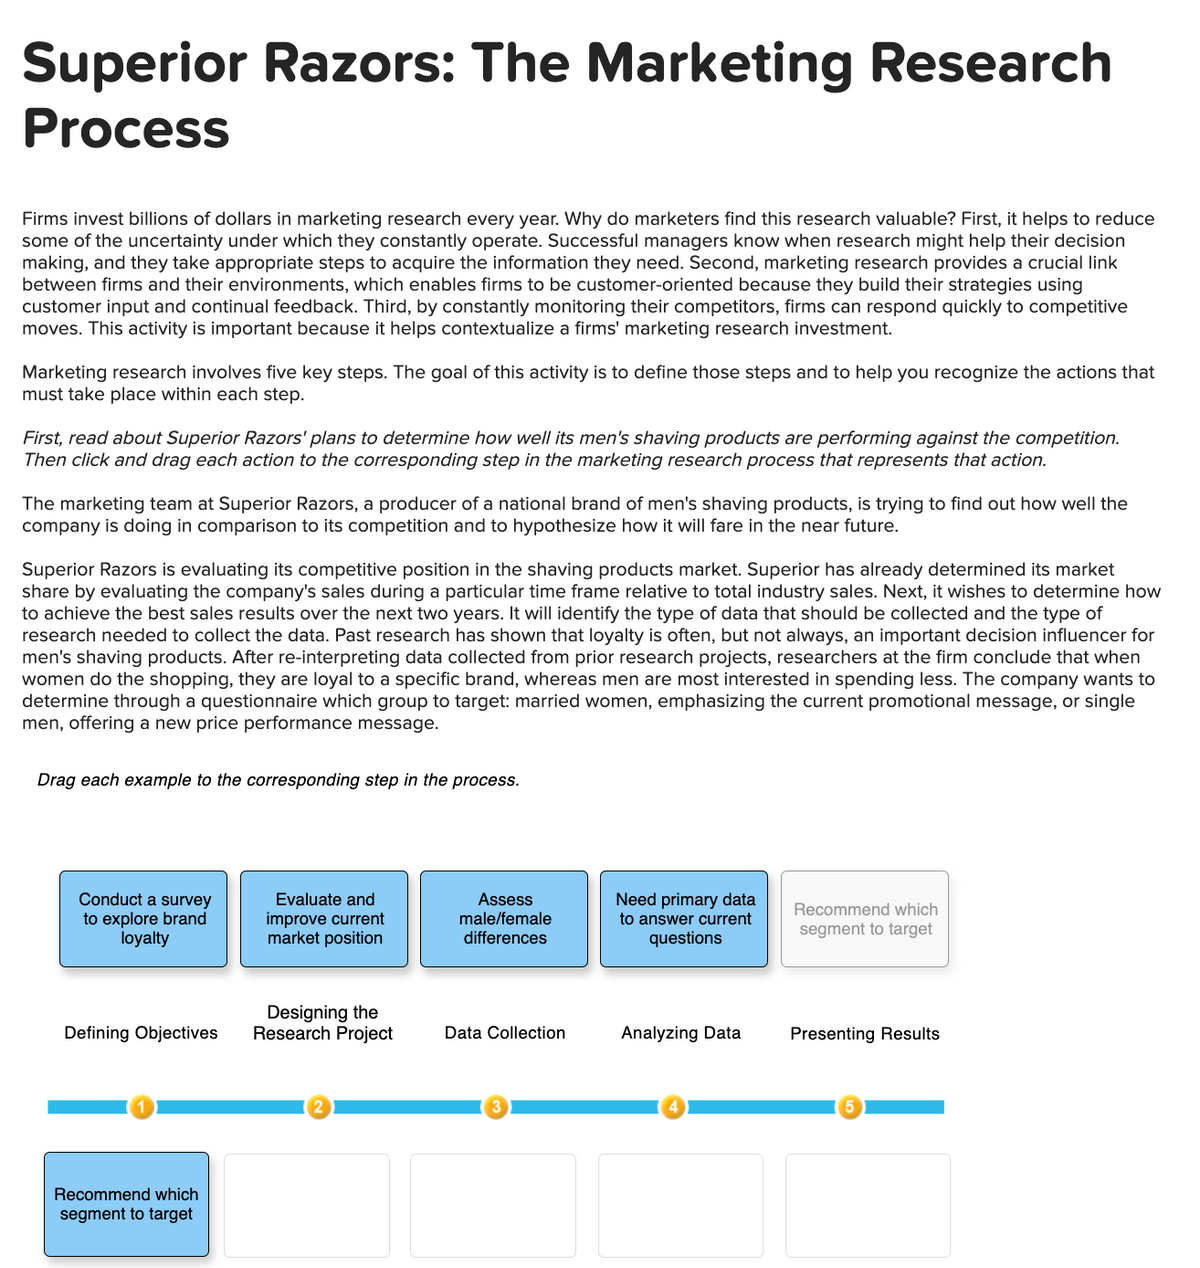 Superior Razors: The Marketing Research
Process
Firms invest billions of dollars in marketing research every year. Why do marketers find this research valuable? First, it helps to reduce
some of the uncertainty under which they constantly operate. Successful managers know when research might help their decision
making, and they take appropriate steps to acquire the information they need. Second, marketing research provides a crucial link
between firms and their environments, which enables firms to be customer-oriented because they build their strategies using
customer input and continual feedback. Third, by constantly monitoring their competitors, firms can respond quickly to competitive
moves. This activity is important because it helps contextualize a firms' marketing research investment.
Marketing research involves five key steps. The goal of this activity is to define those steps and to help you recognize the actions that
must take place within each step.
First, read about Superior Razors' plans to determine how well its men's shaving products are performing against the competition.
Then click and drag each action to the corresponding step in the marketing research process that represents that action.
The marketing team at Superior Razors, a producer of a national brand of men's shaving products, is trying to find out how well the
company is doing in comparison to its competition and to hypothesize how it will fare in the near future.
Superior Razors is evaluating its competitive position in the shaving products market. Superior has already determined its market
share by evaluating the company's sales during a particular time frame relative to total industry sales. Next, it wishes to determine how
to achieve the best sales results over the next two years. It will identify the type of data that should be collected and the type of
research needed to collect the data. Past research has shown that loyalty is often, but not always, an important decision influencer for
men's shaving products. After re-interpreting data collected from prior research projects, researchers at the firm conclude that when
women do the shopping, they are loyal to a specific brand, whereas men are most interested in spending less. The company wants to
determine through a questionnaire which group to target: married women, emphasizing the current promotional message, or single
men, offering a new price performance message.
Drag each example to the corresponding step in the process.
Conduct a survey
to explore brand
loyalty
Defining Objectives
Recommend which
segment to target
Evaluate and
improve current
market position
Designing the
Research Project
Assess
male/female
differences
Data Collection
Need primary data
to answer current
questions
Analyzing Data
Recommend which
segment to target
Presenting Results
5